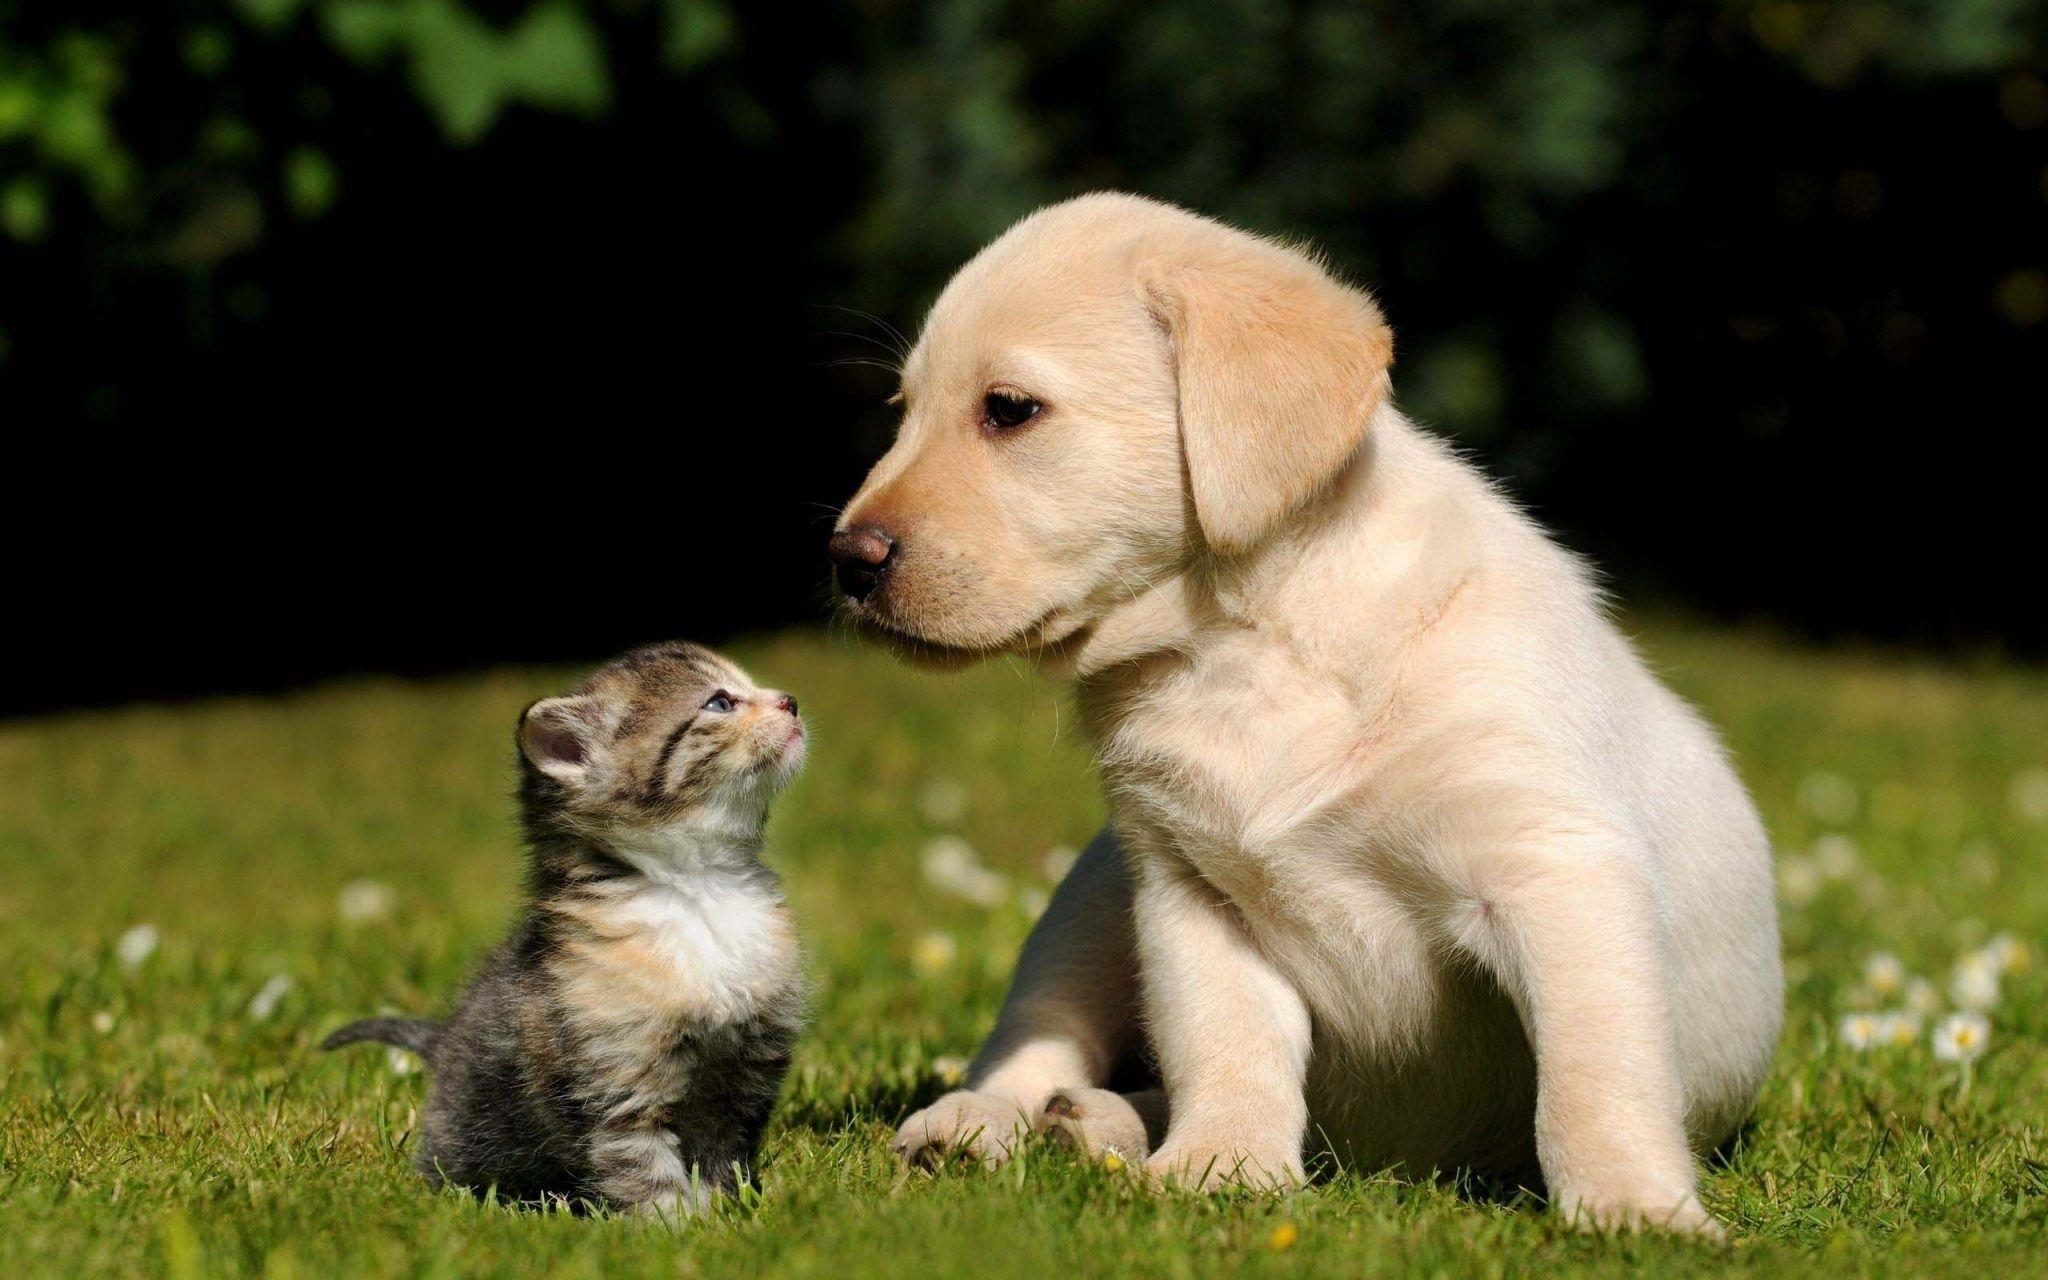 Download The Most Beautiful Cute Baby Cats And Dogs Wallpaper